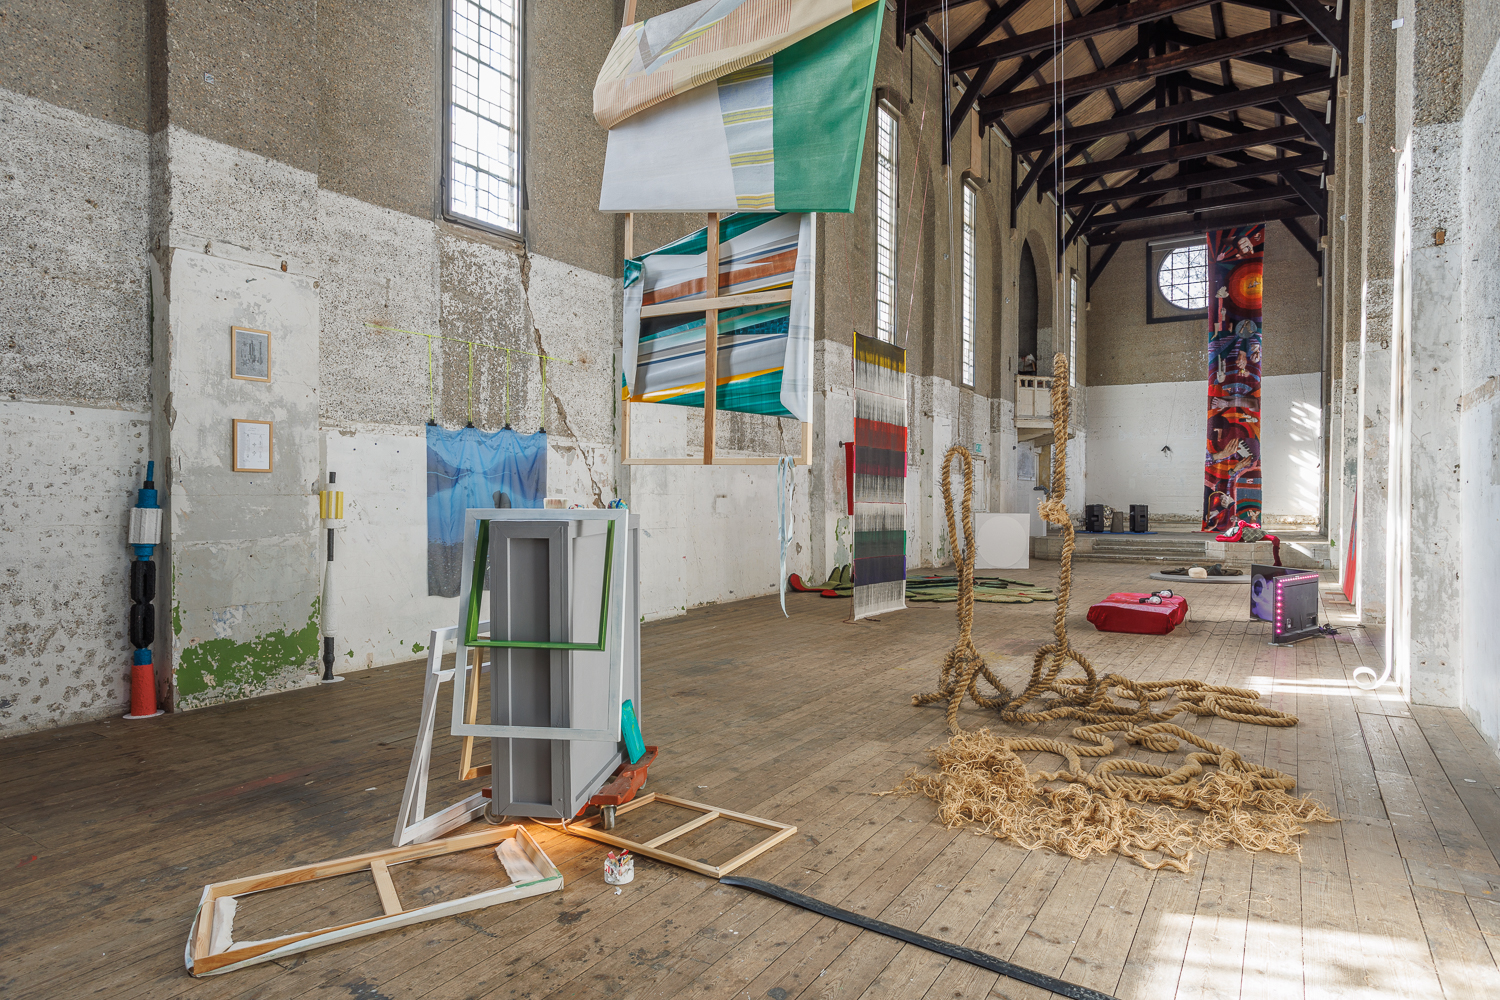 A collection of sculptures, some hanging, some placed on the floor occupy the gallery space, an old concrete church.